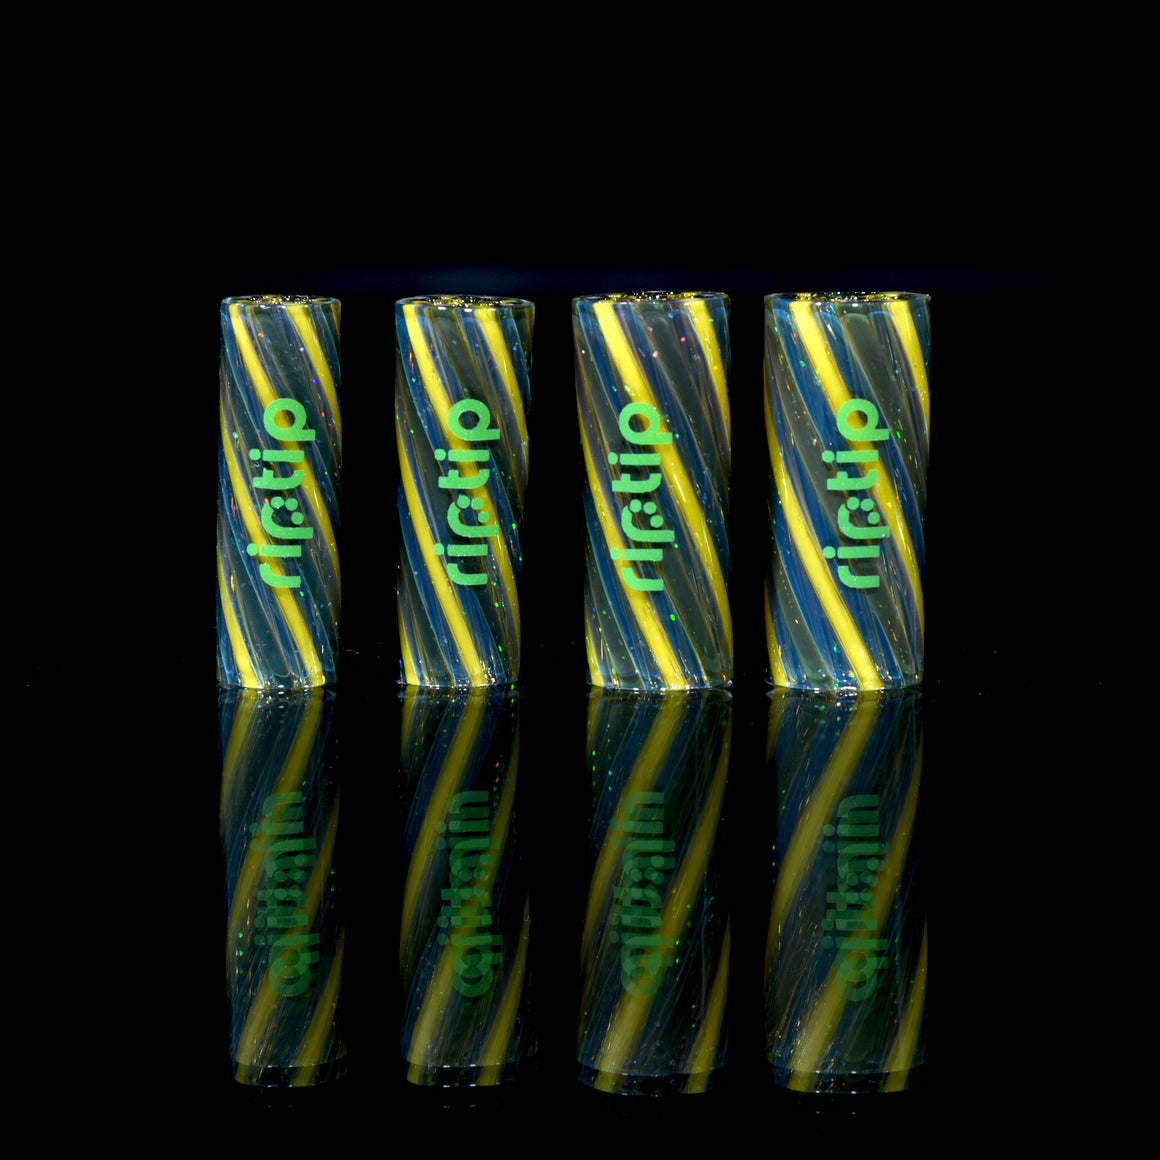 Crushed Opal Pinstripe RipTip Filter Tips for Blunts, Joints, etc. - Deep Space